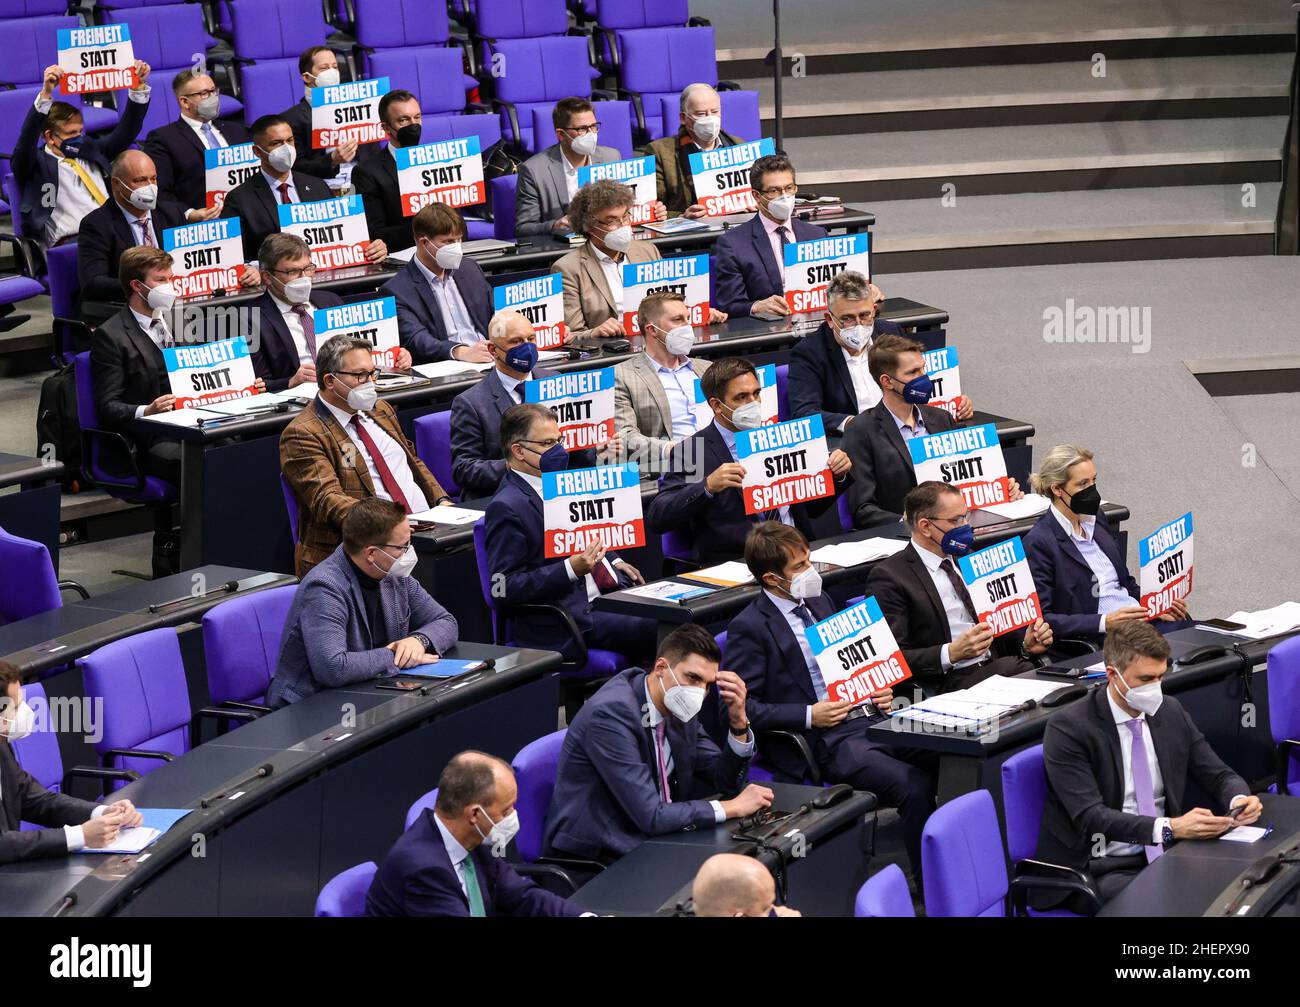 Members of the Alternative For Germany (AFD) party faction hold banners reading 'Freedom Instead of Division' as German Chancellor Olaf Scholz (SPD) speaks during a Government questioning session at Germany's lower house of parliament, the Bundestag, in Berlin, Germany, January 12, 2022.  The session provides an opportunity for the different parliament groups members to direct questions towards representatives of the German federal government. (Photo by Omer Messinger) Stock Photo